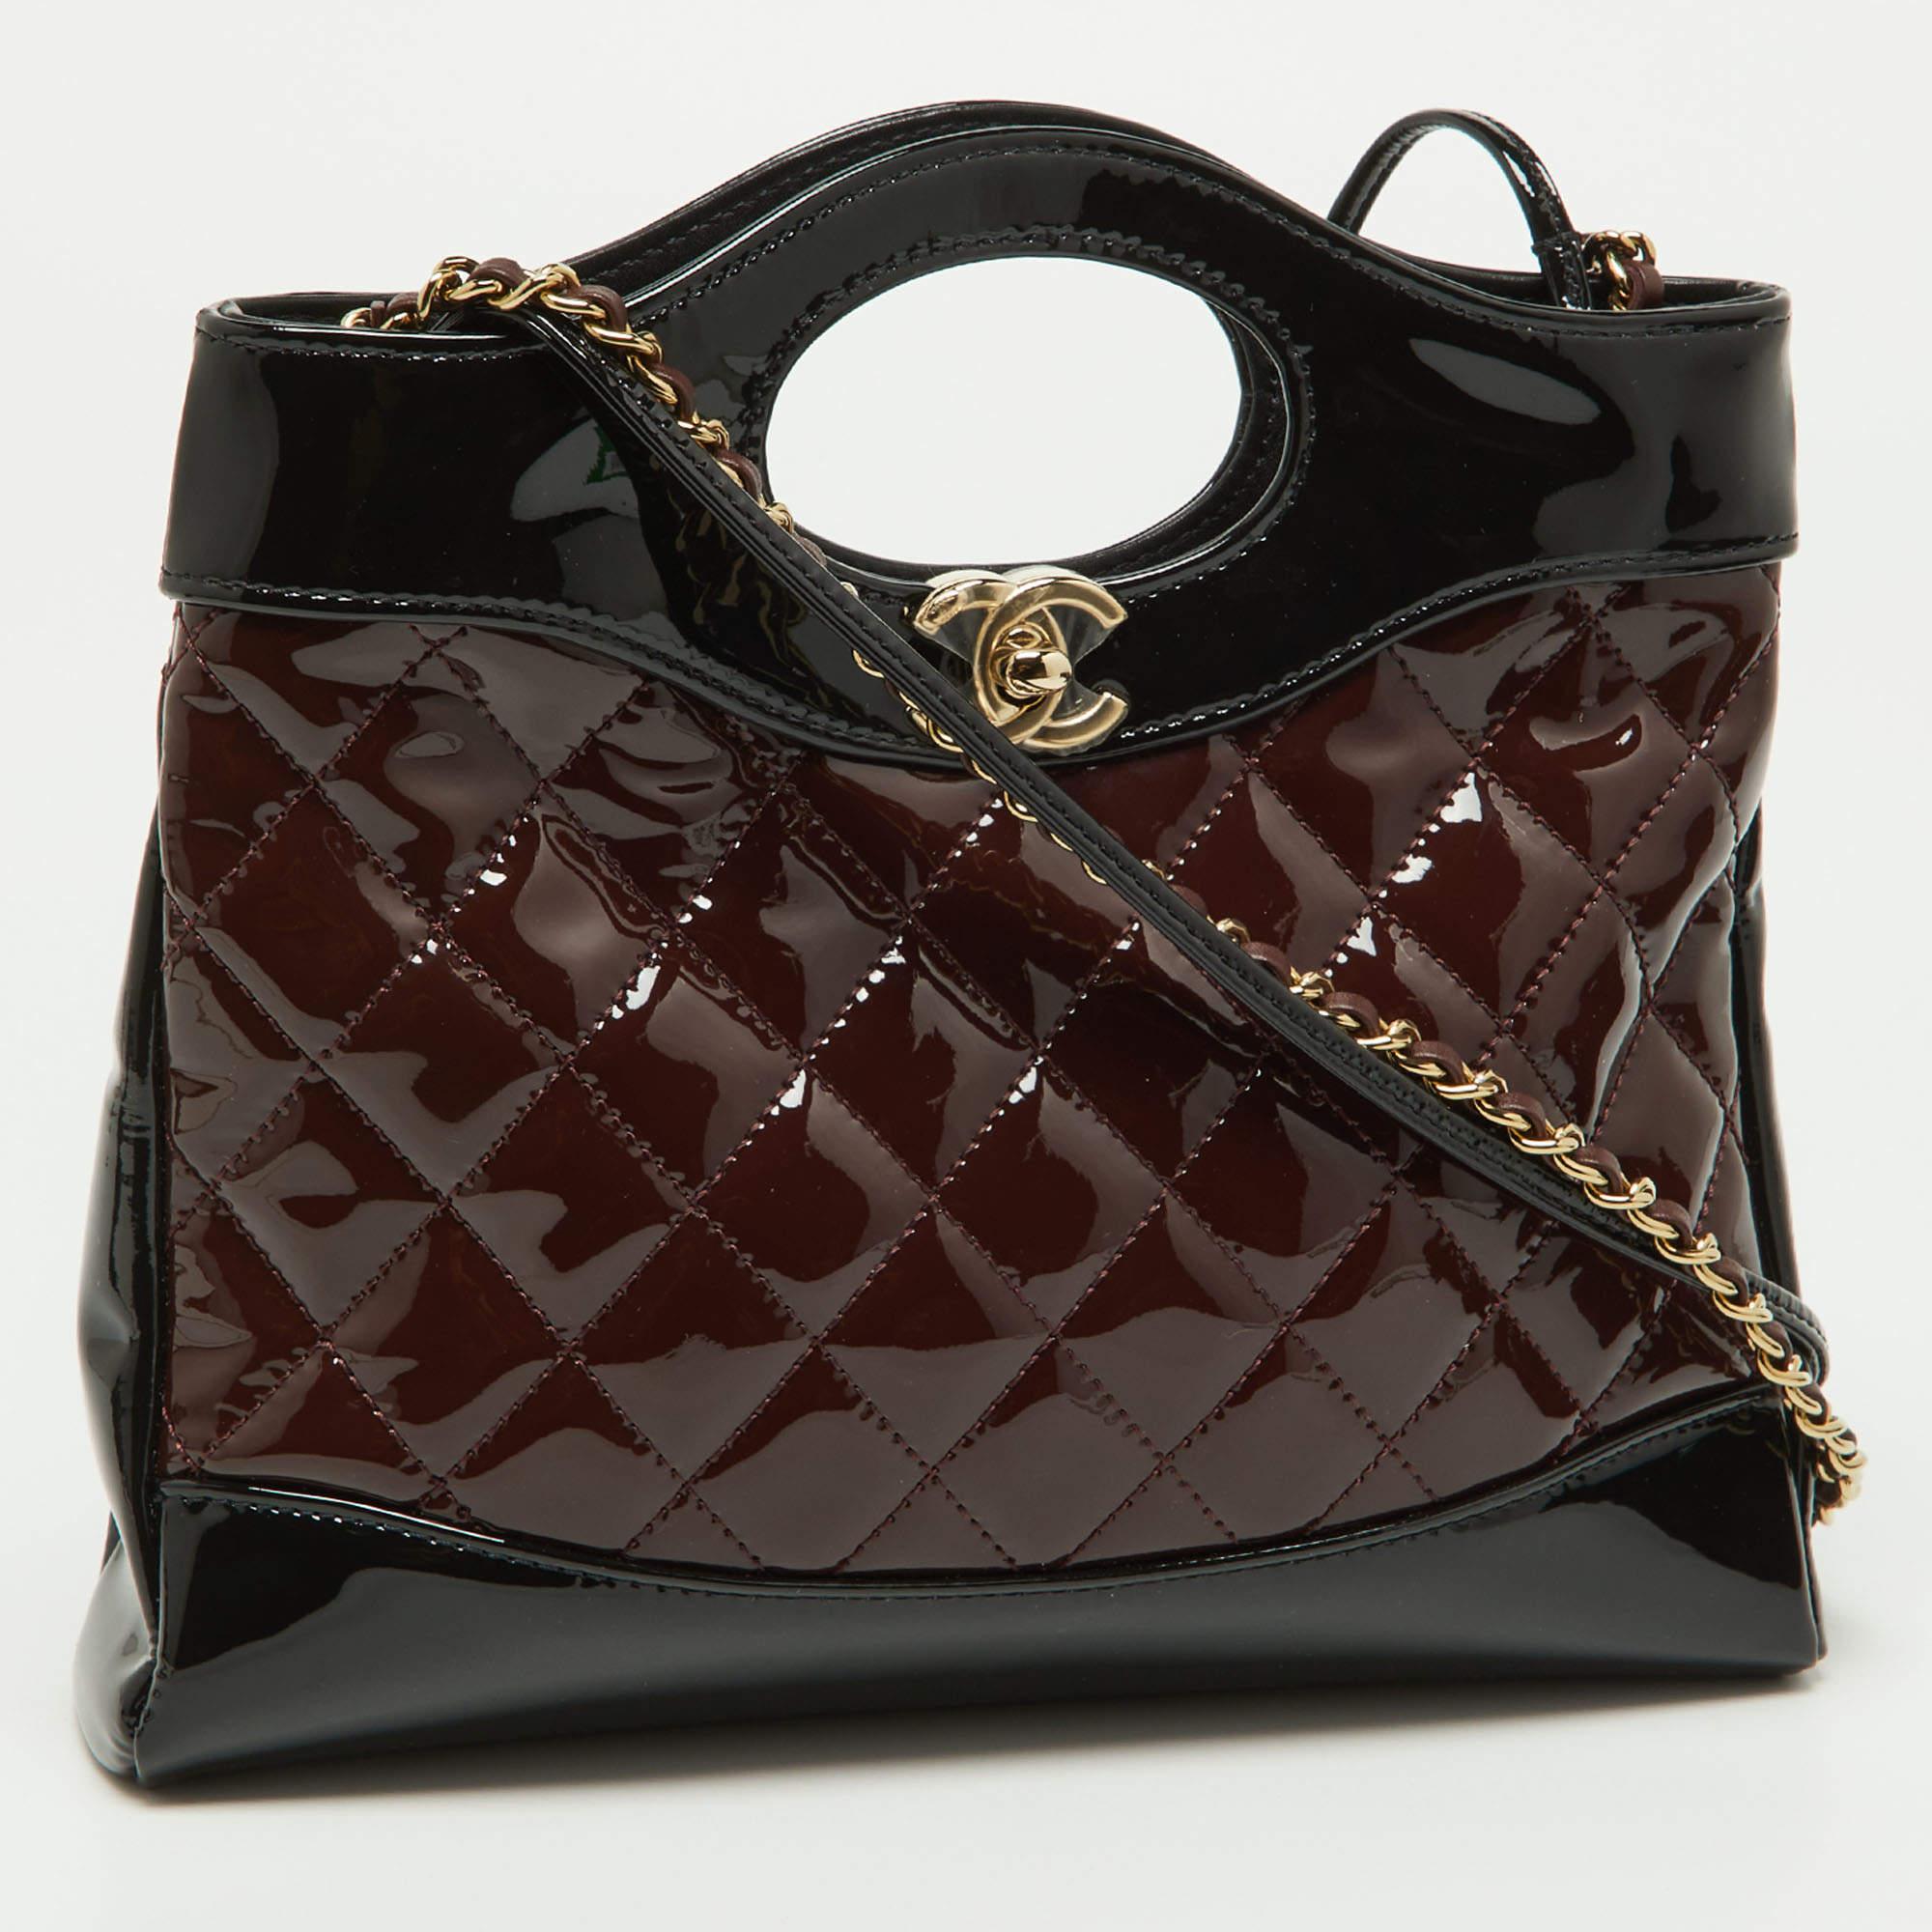 Chanel Black/Burgundy Quilted Patent Leather Mini 31 Shopping Tote 3